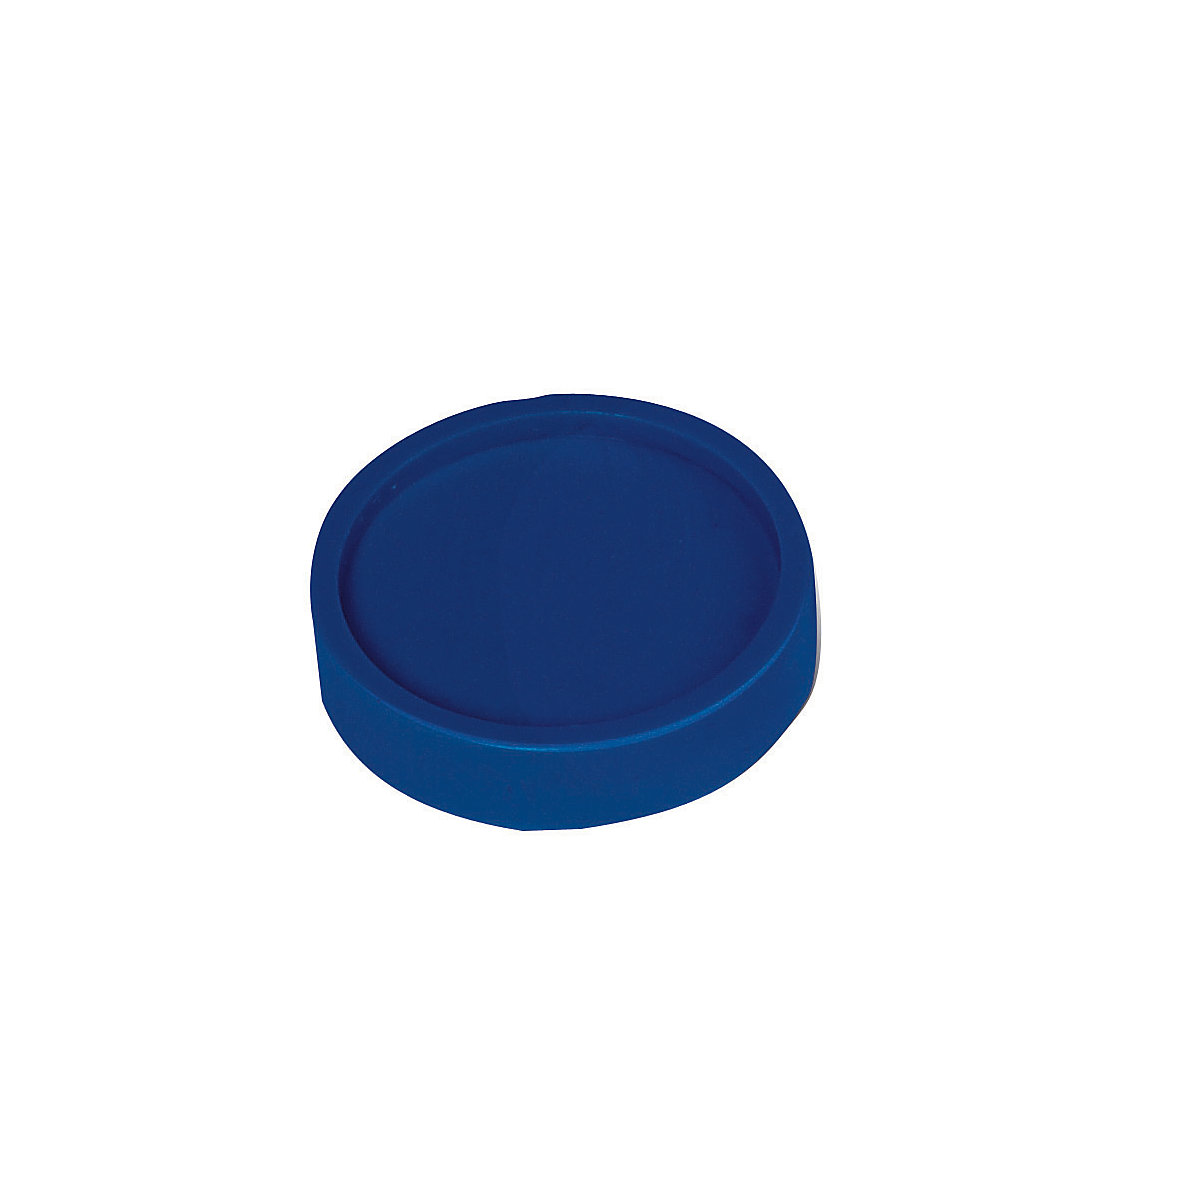 Round magnets – MAUL, Ø 30 mm, pack of 100, blue-4